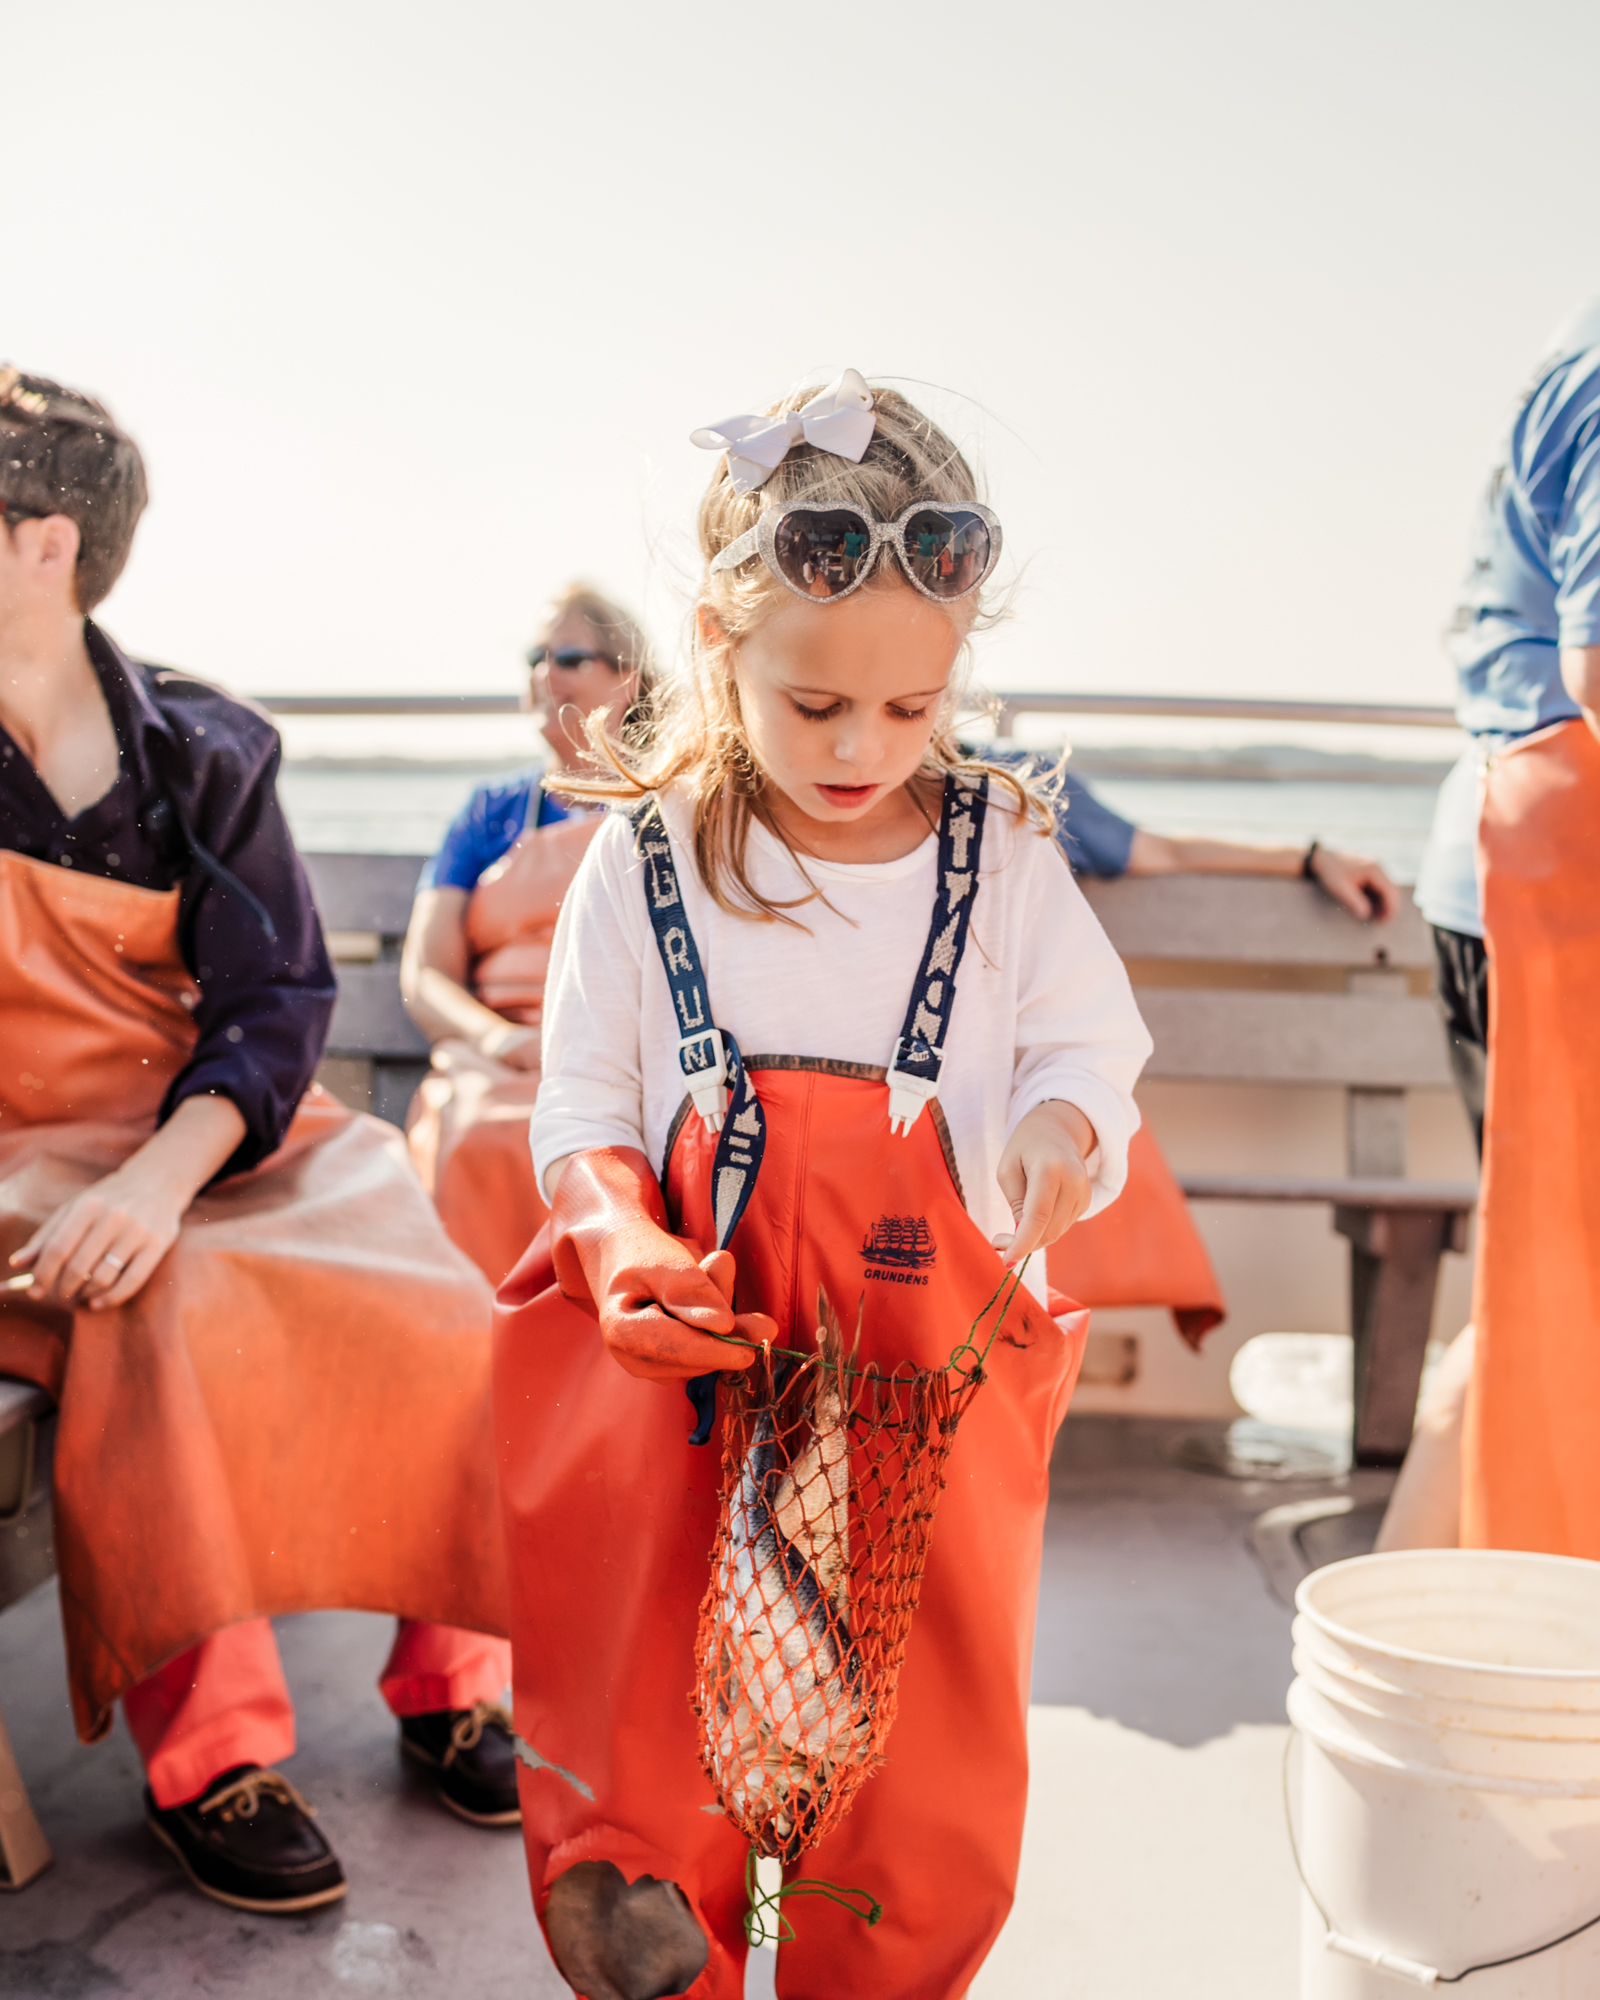 Looking for something fun to do in Portland, Maine with kids? Look no further than lobster fishing with Lucky Catch Cruises!